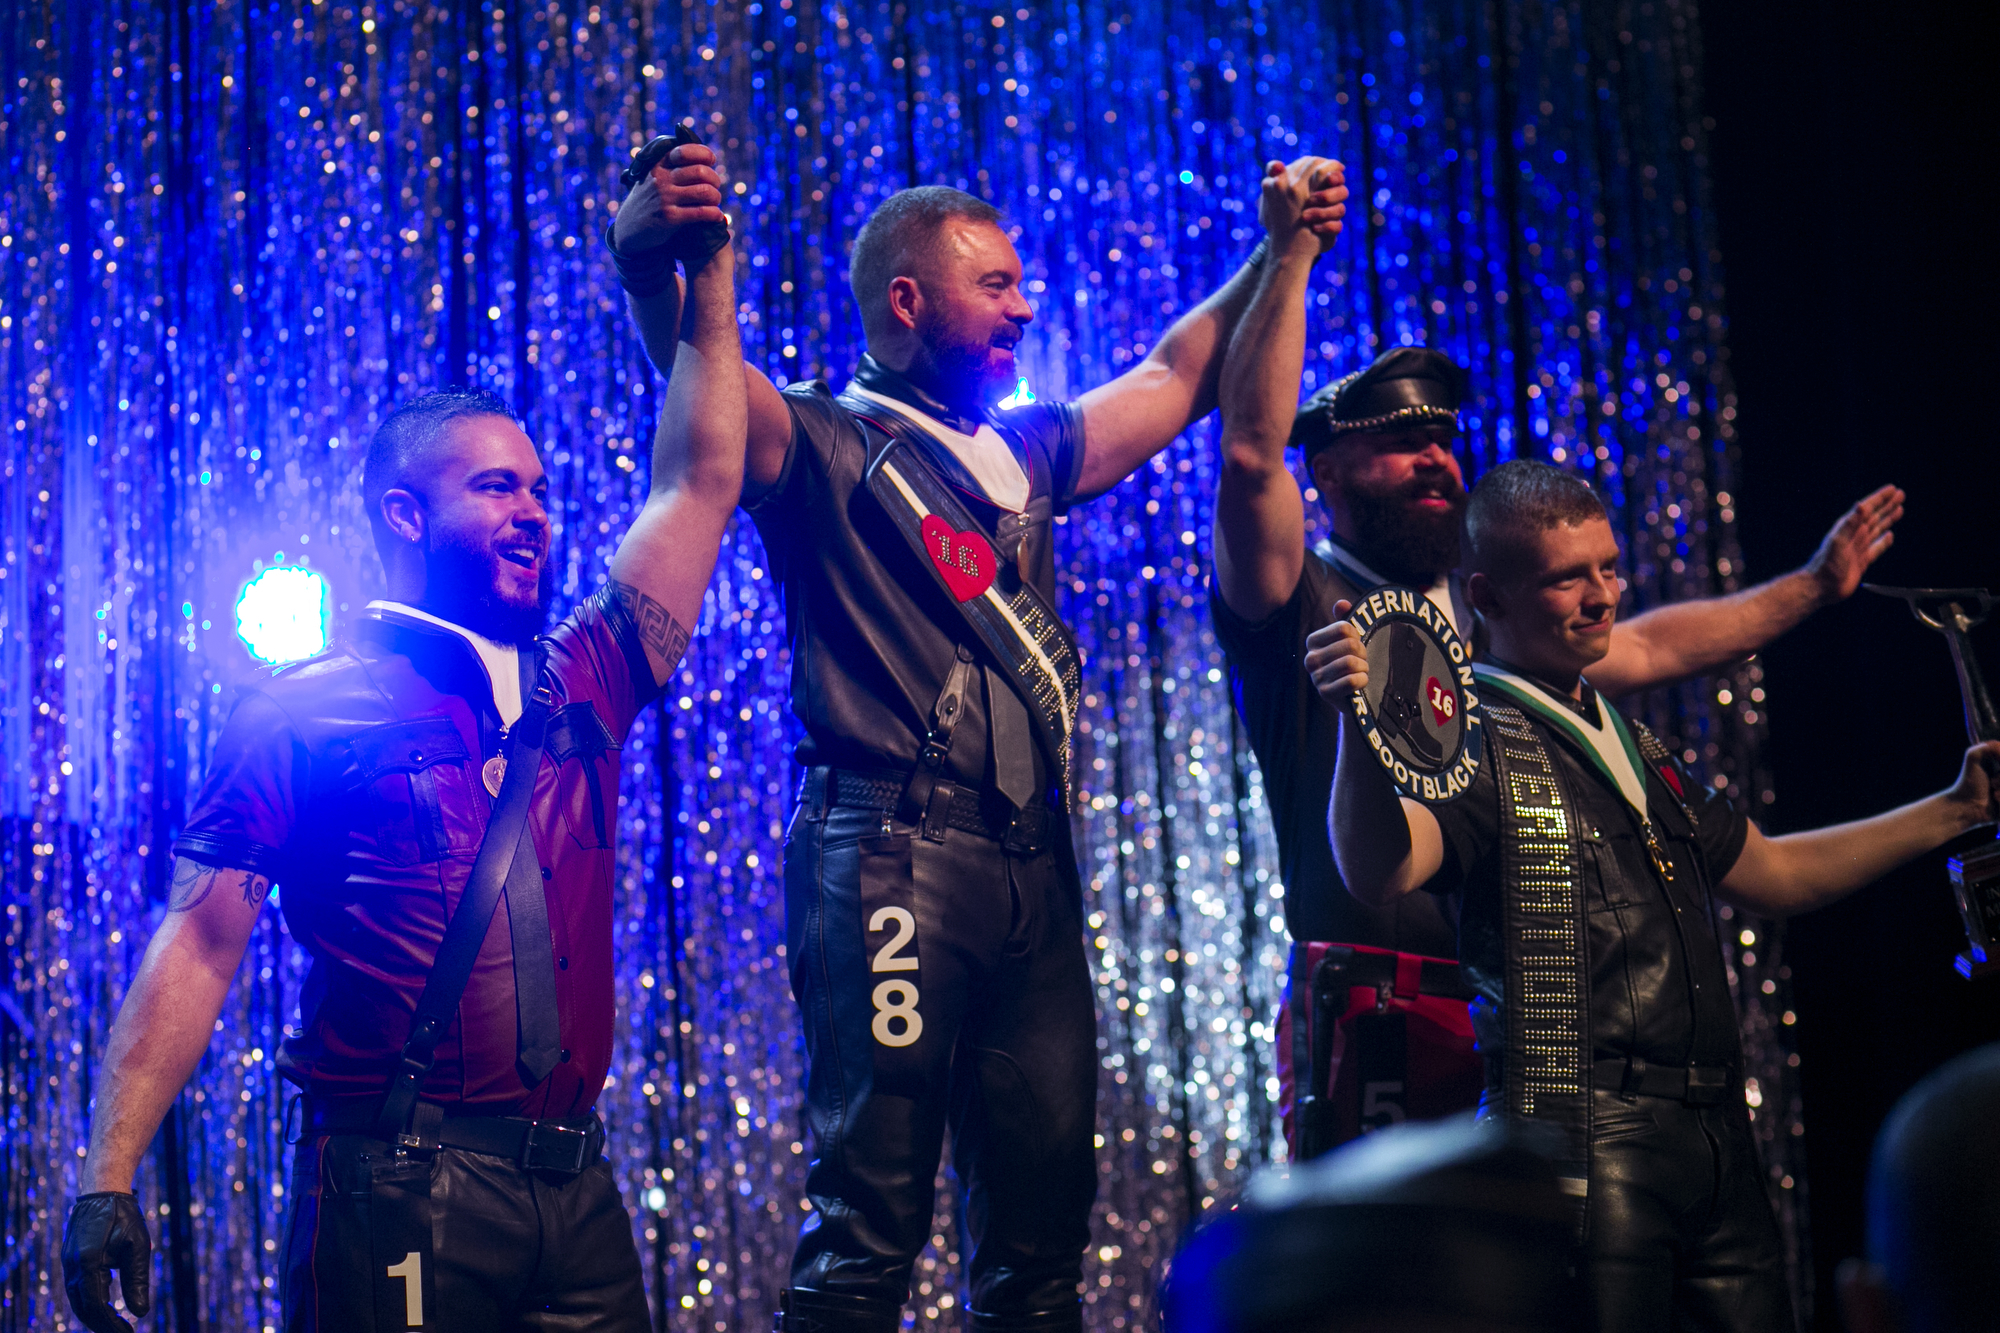  Adam Henderson, far left, third place, David Bailey, middle left, first place, Todd Harris, middle right, second place, and Erick Joseph, far right, winner of Mr. Bootblack, celebrate during the conclusion of The 38th Annual International Mr. Leathe